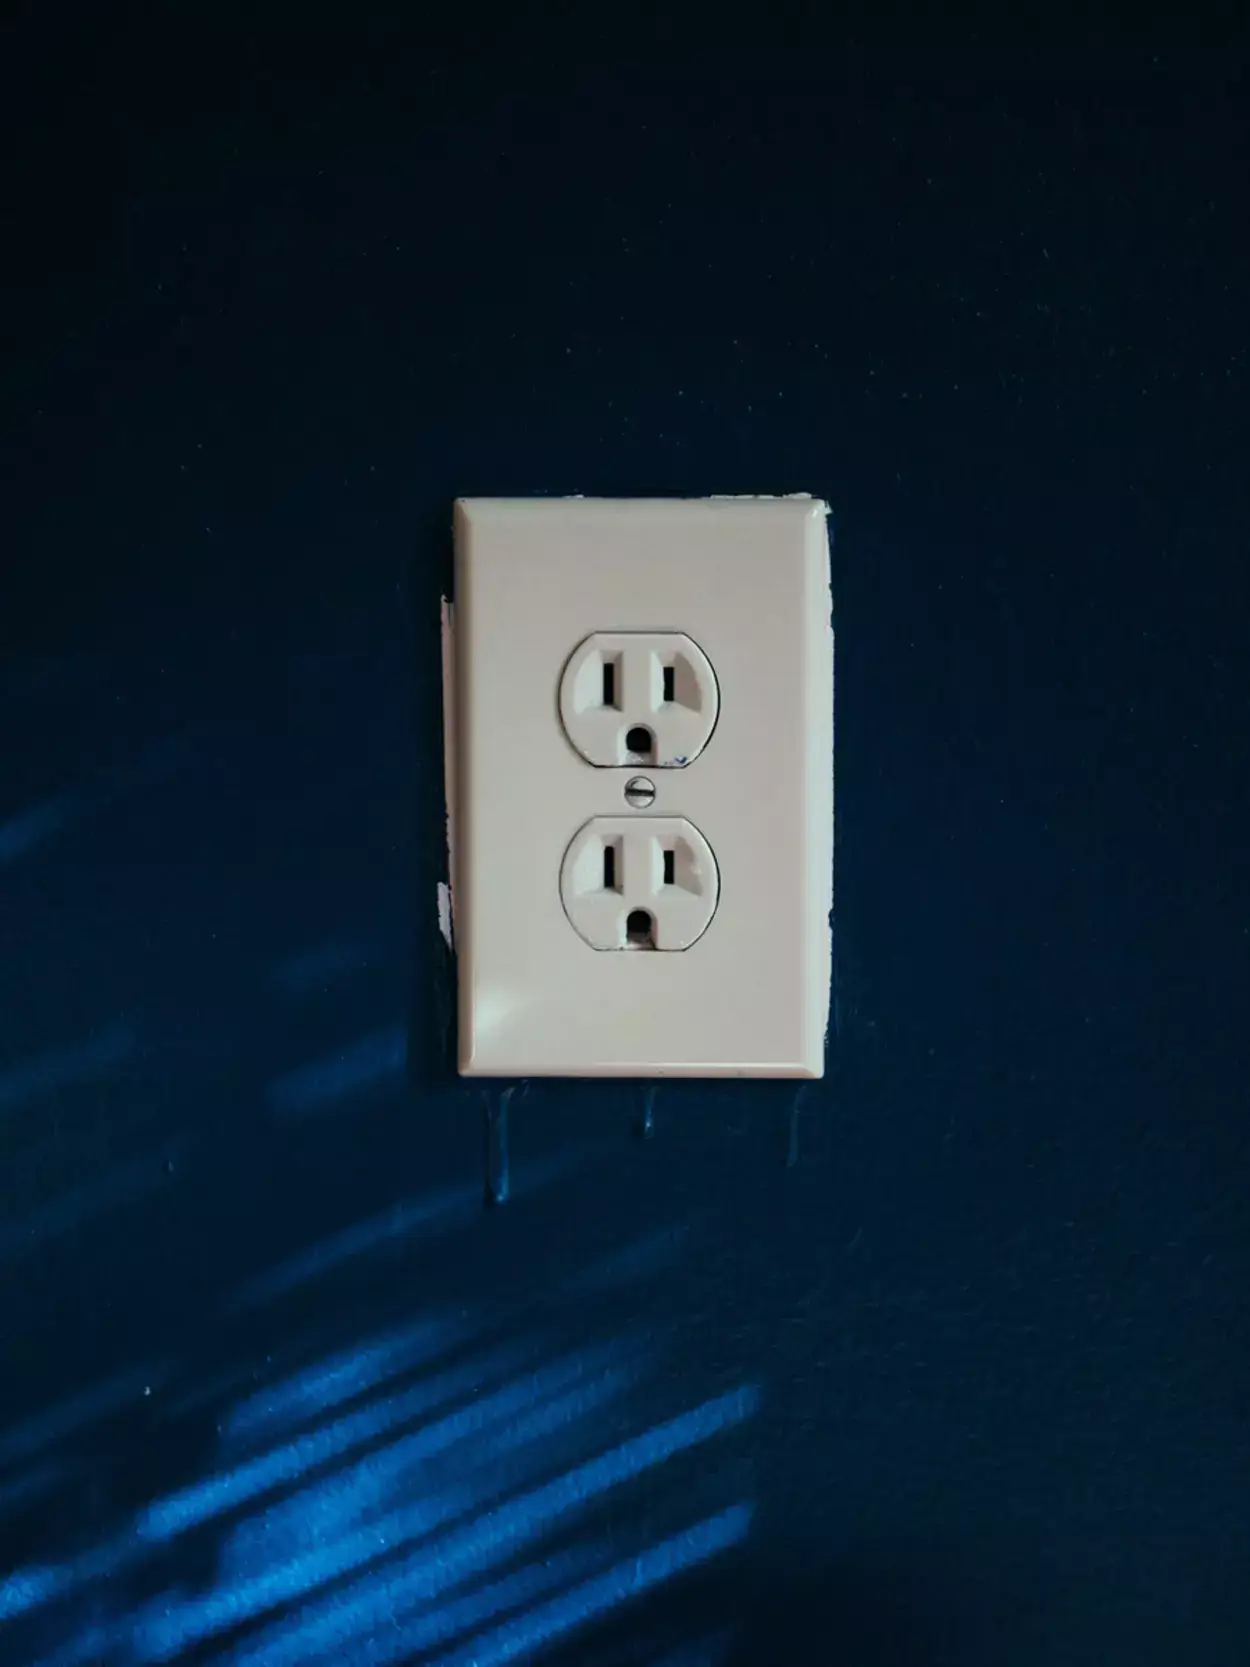 An Outlet